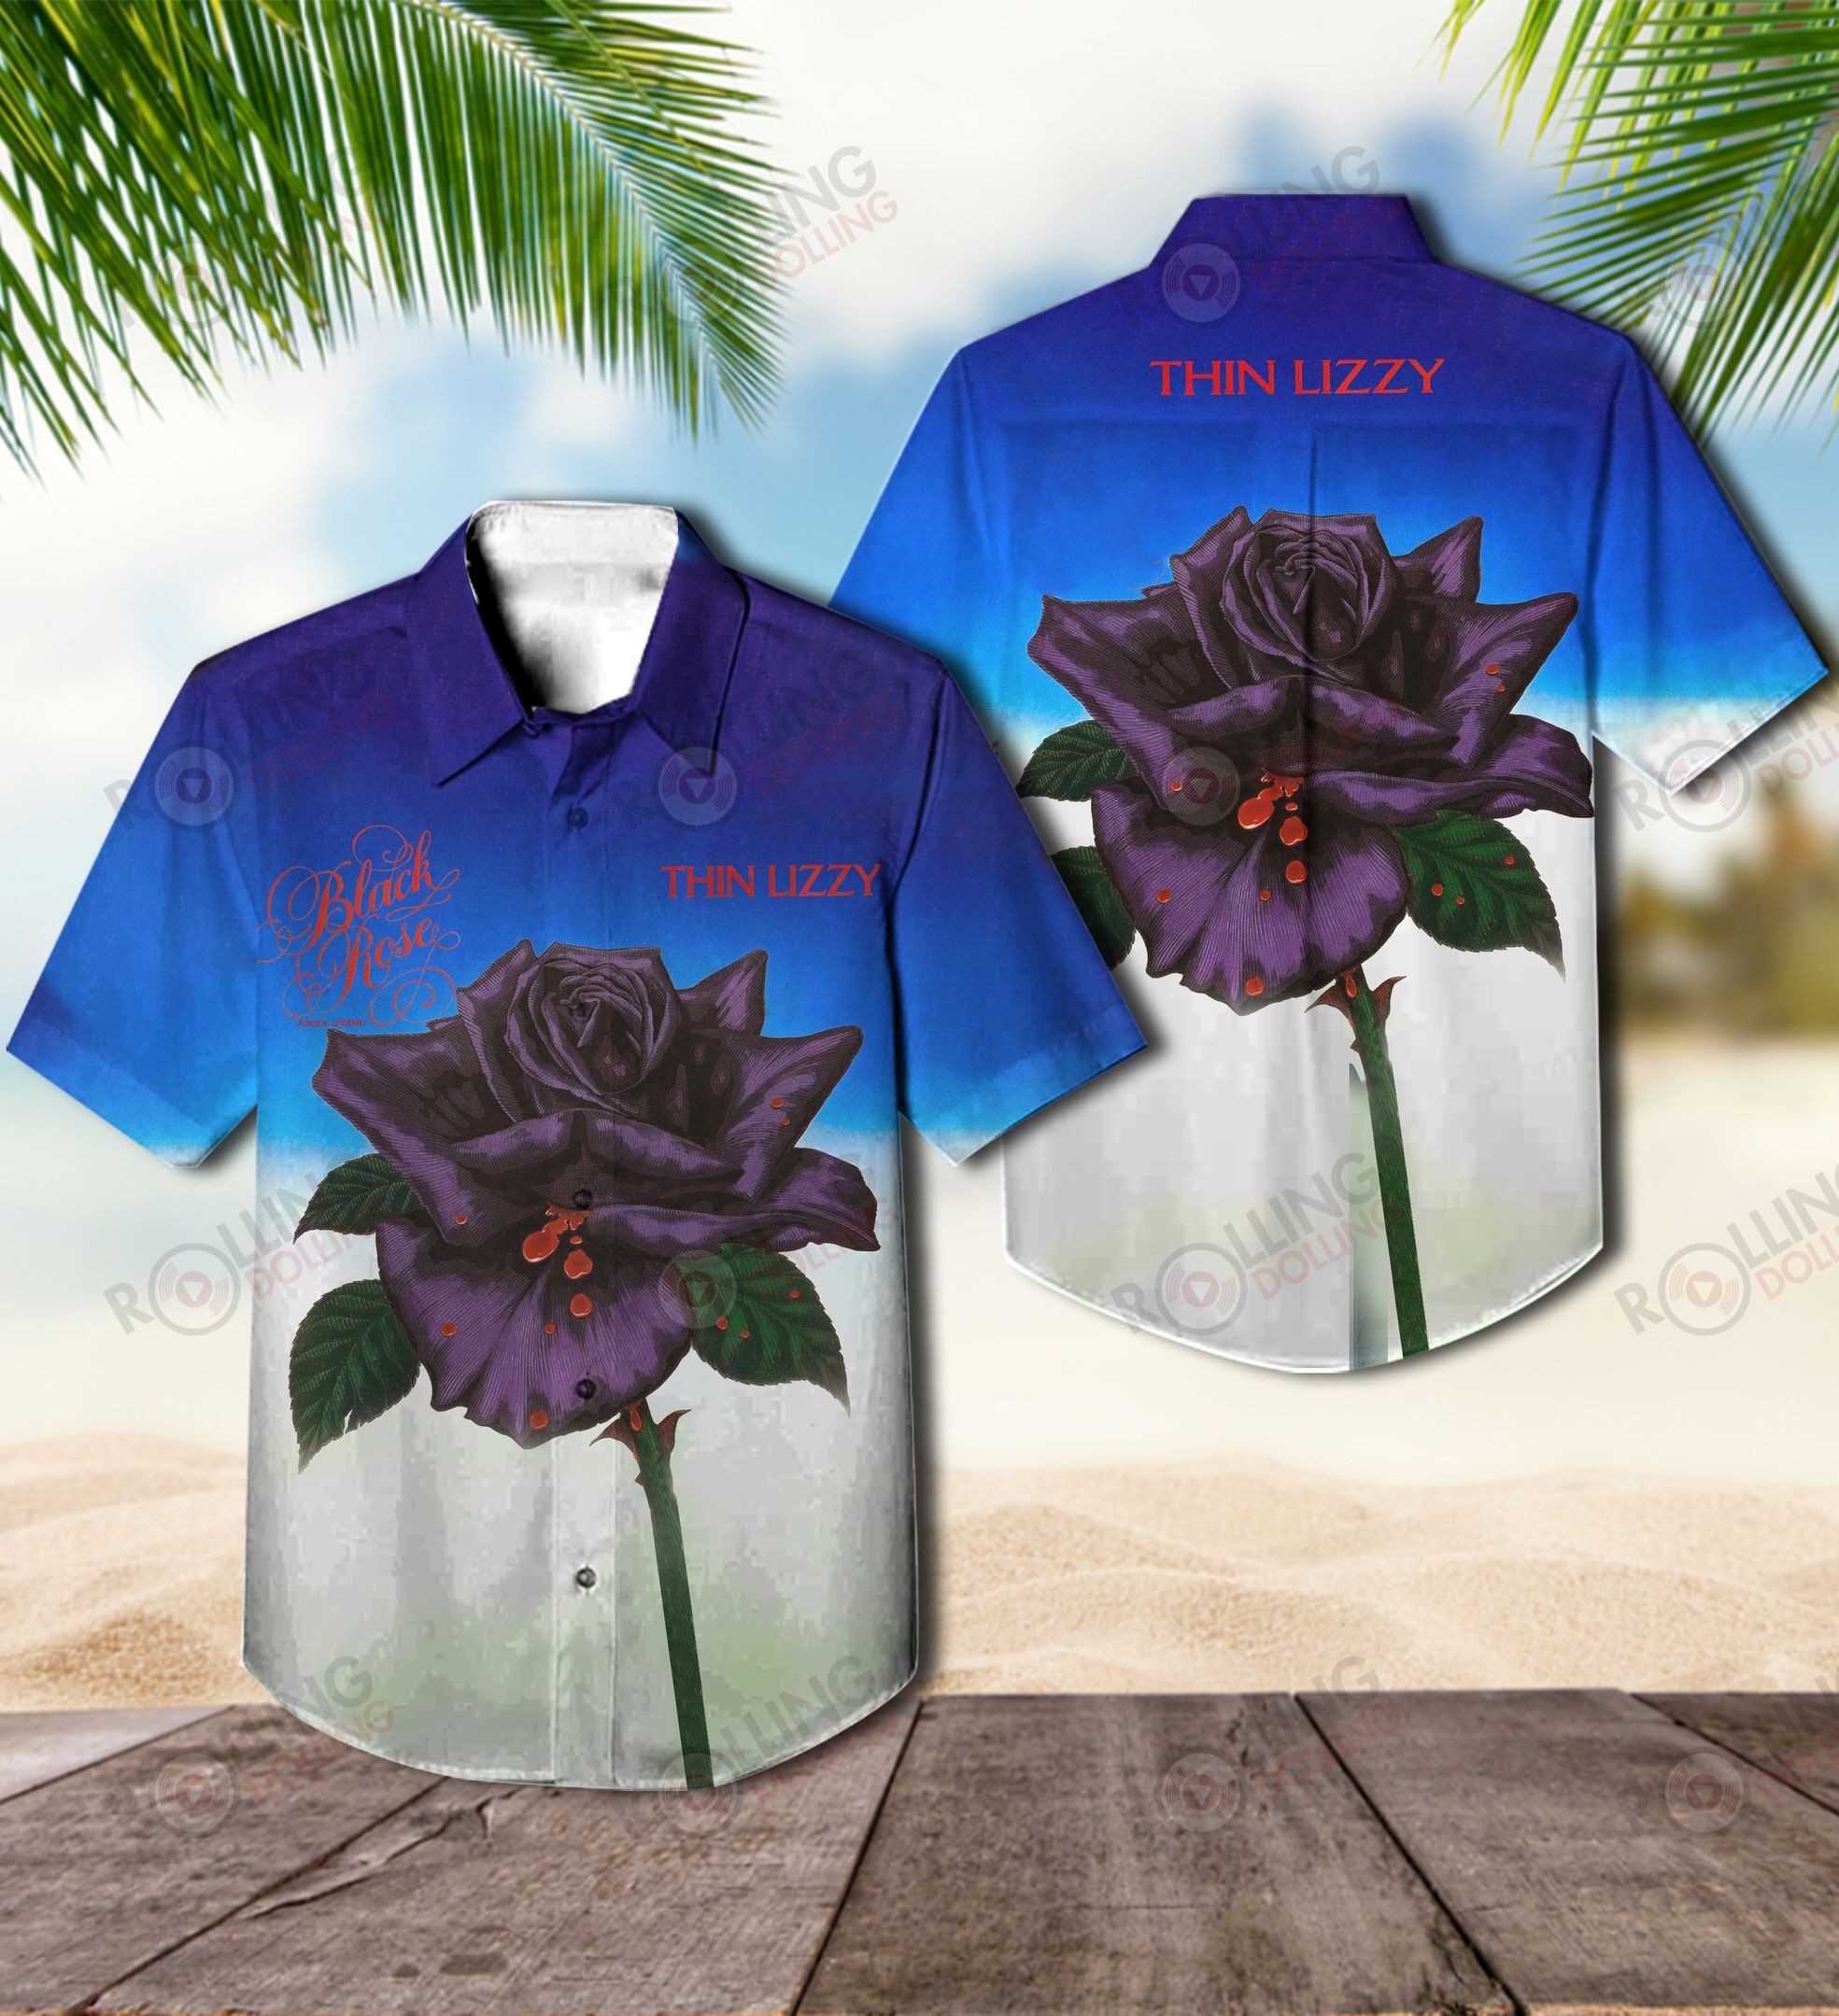 You'll have the perfect vacation outfit with this Hawaiian shirt 149